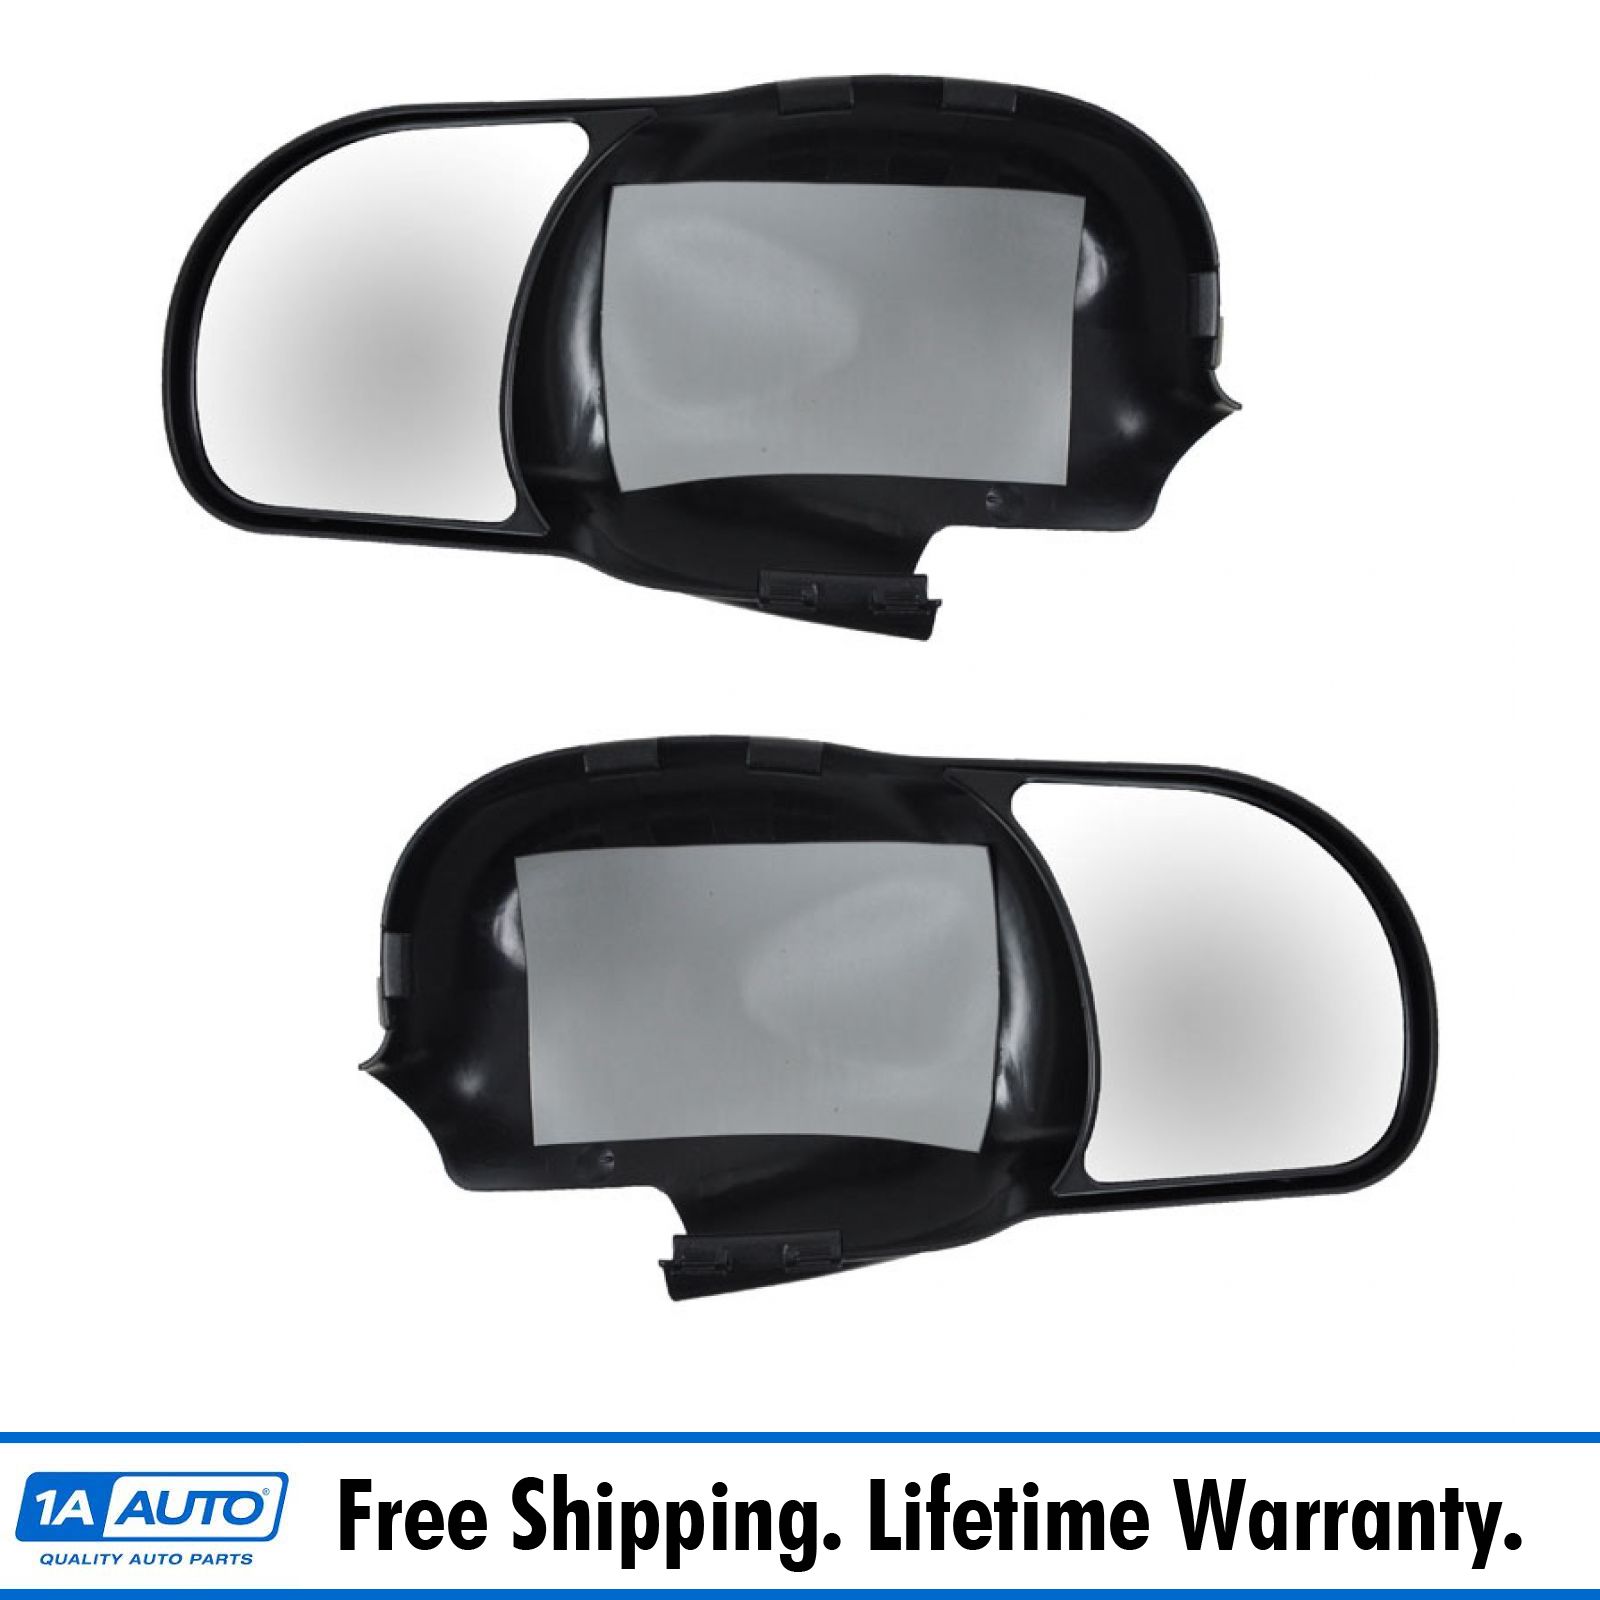 Mirror extensions for ford f150 #2